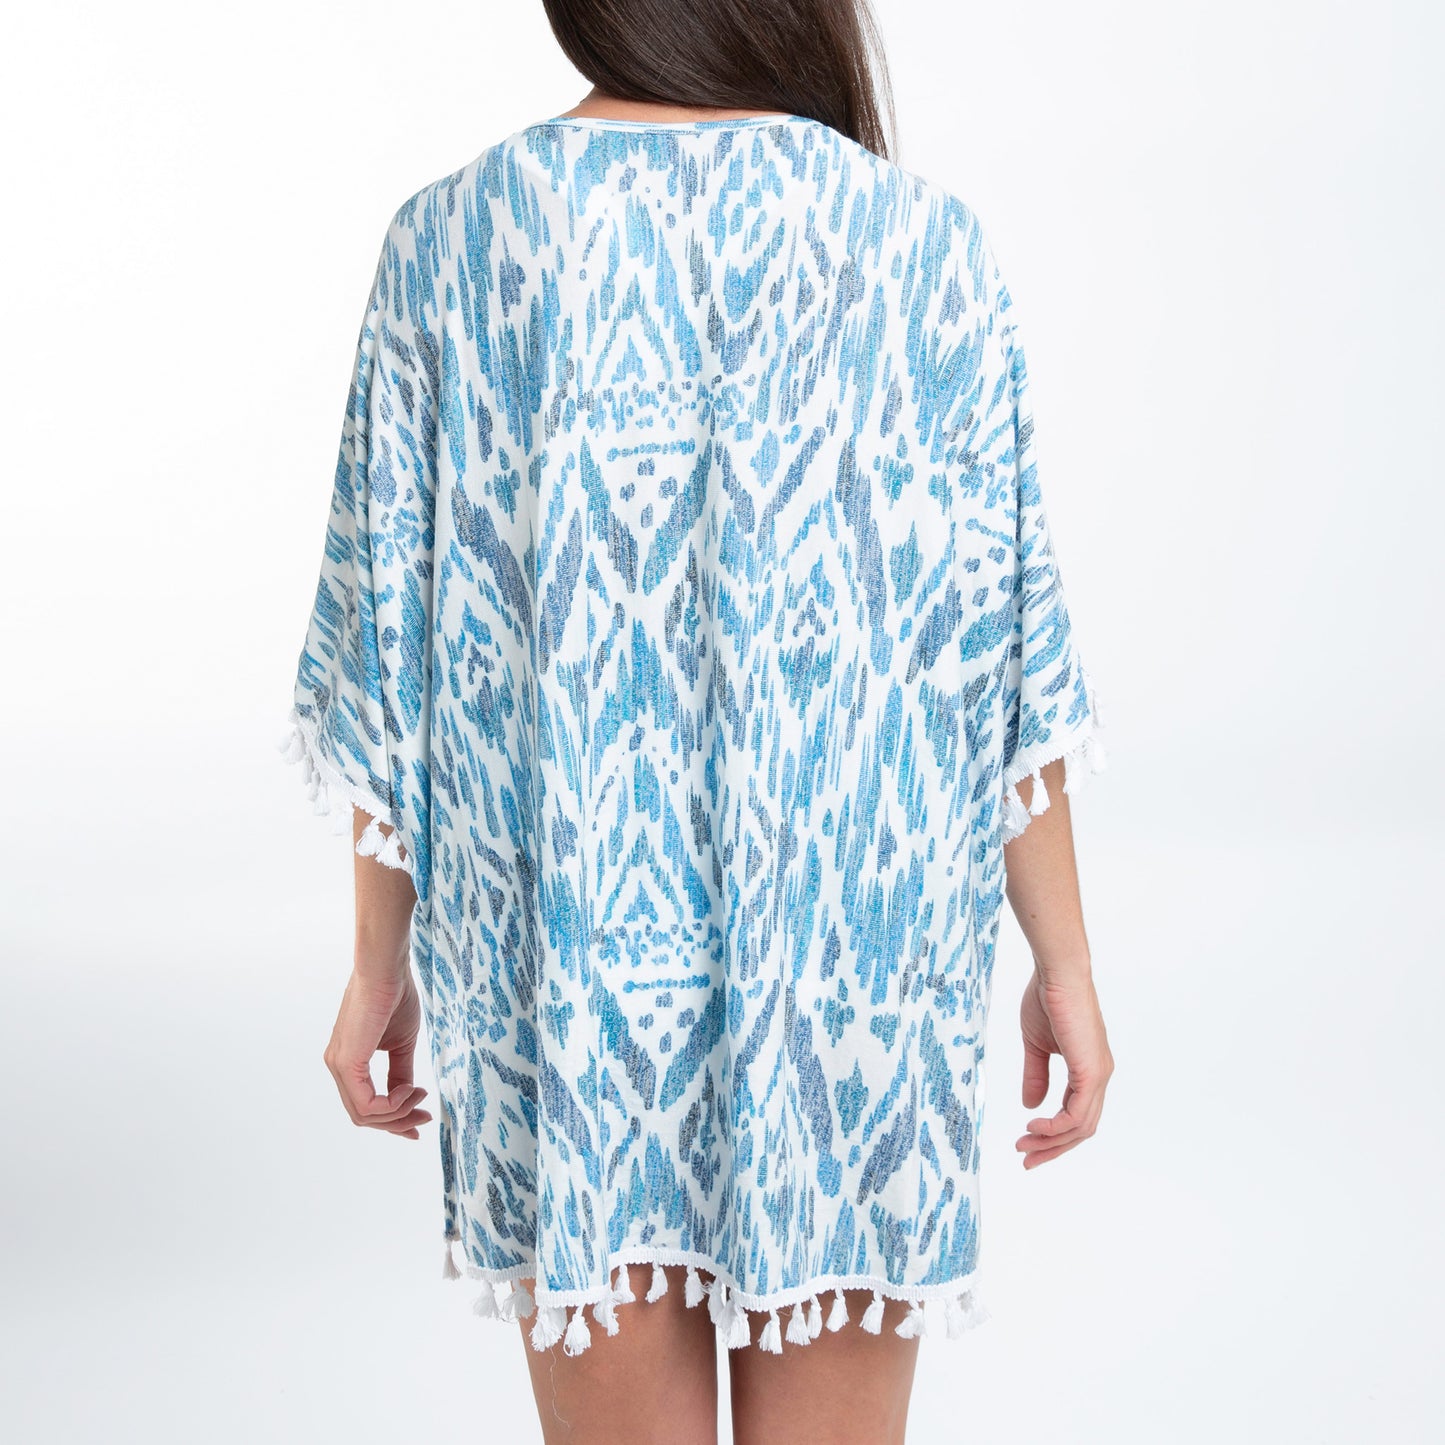 Elsie Teal Ikat One Size Beach Swimsuit Cover Up